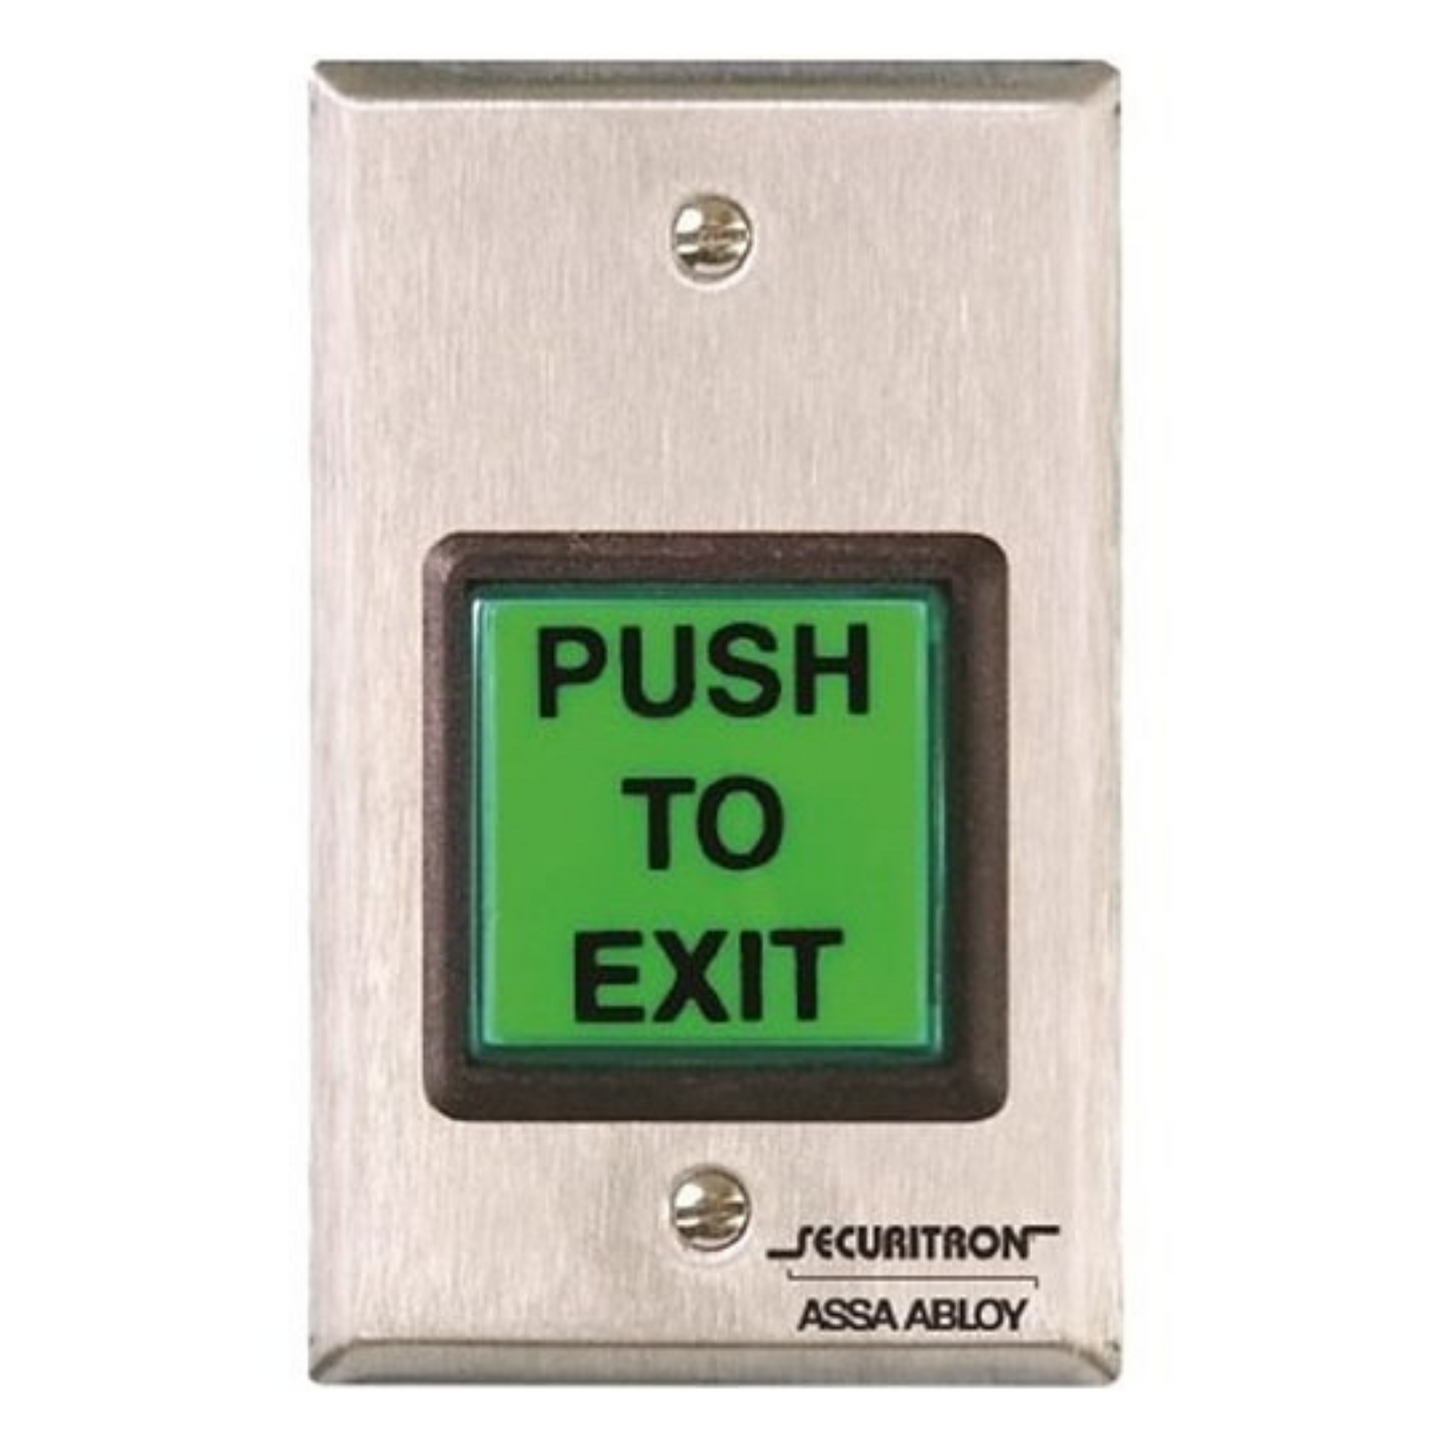 Securitron EEB2 Emergency Exit Button with 30 Second Release 2" Square Emergency Exit Button with 30 second push button release. The device is mounted on a stainless steel, single-gang faceplate and features internal double-break wiring.